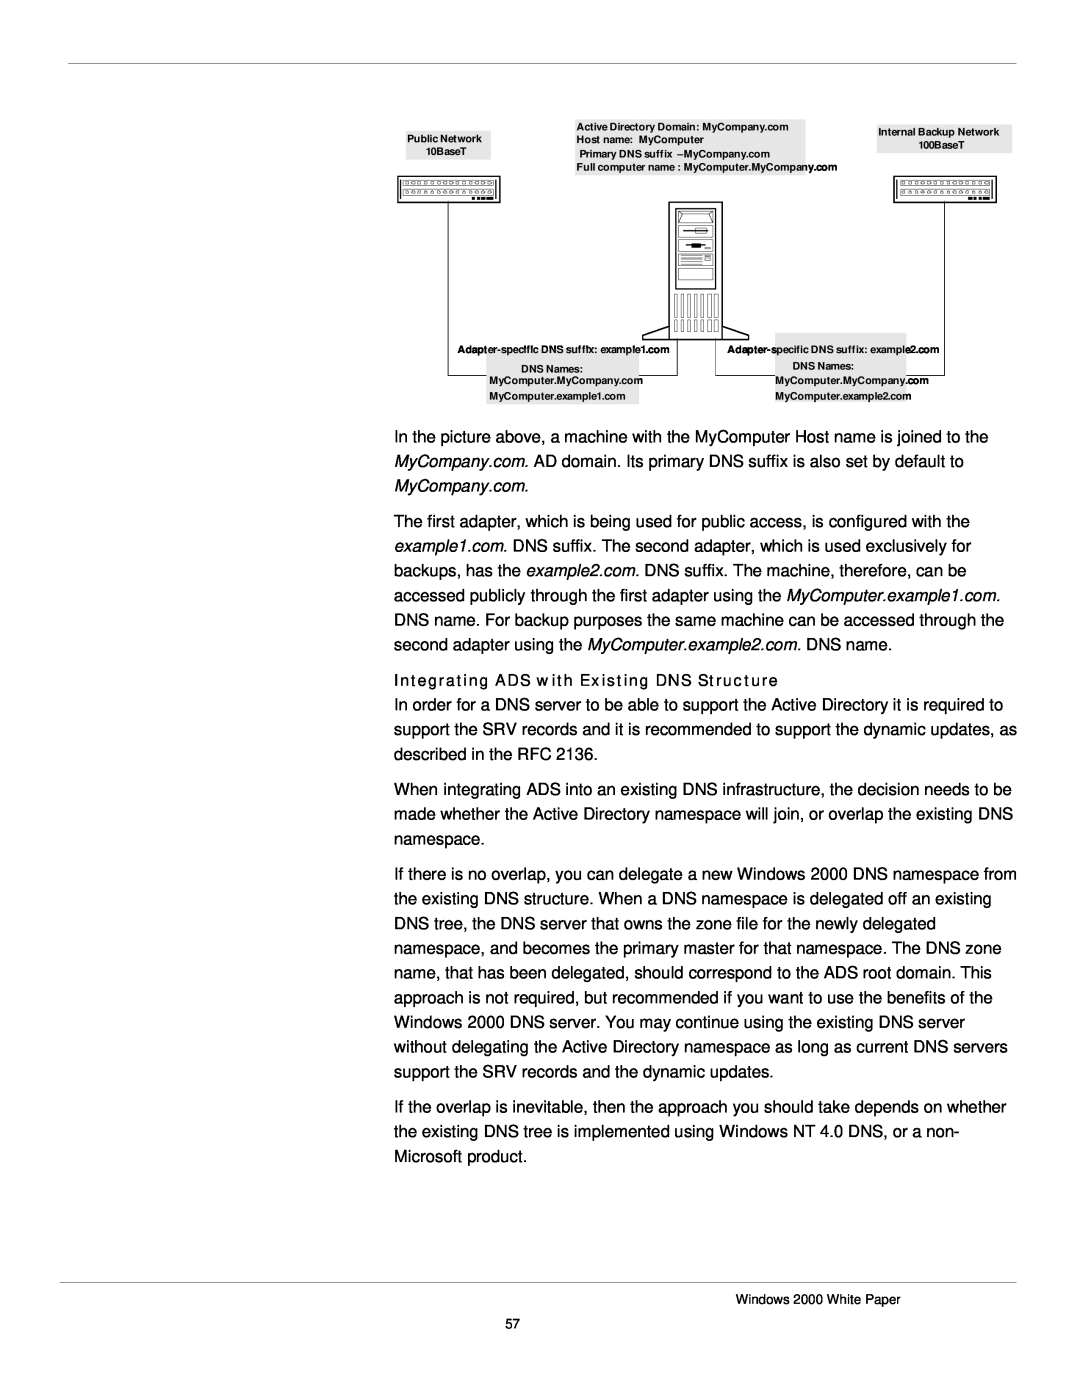 Microsoft windows 2000 DNS manual Integrating ADS with Existing DNS Structure 